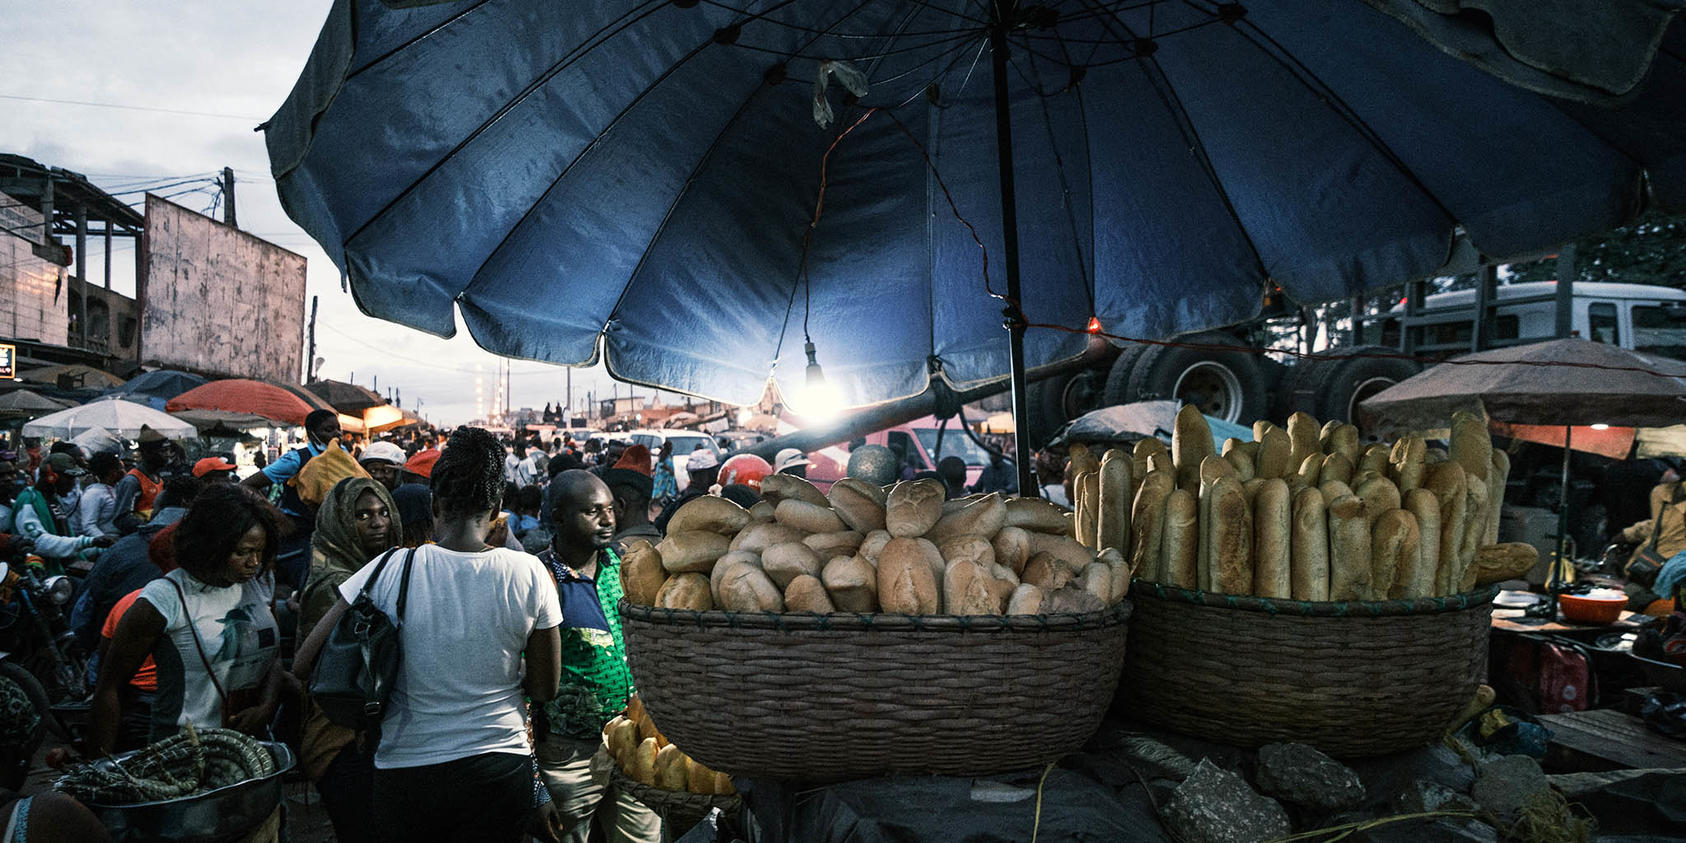 A food market on May 10, 2022, in Douala, Cameroon, where food inflation, exacerbated by Russia’s war in Ukraine, is causing hardship. (Tom Saater/The New York Times)